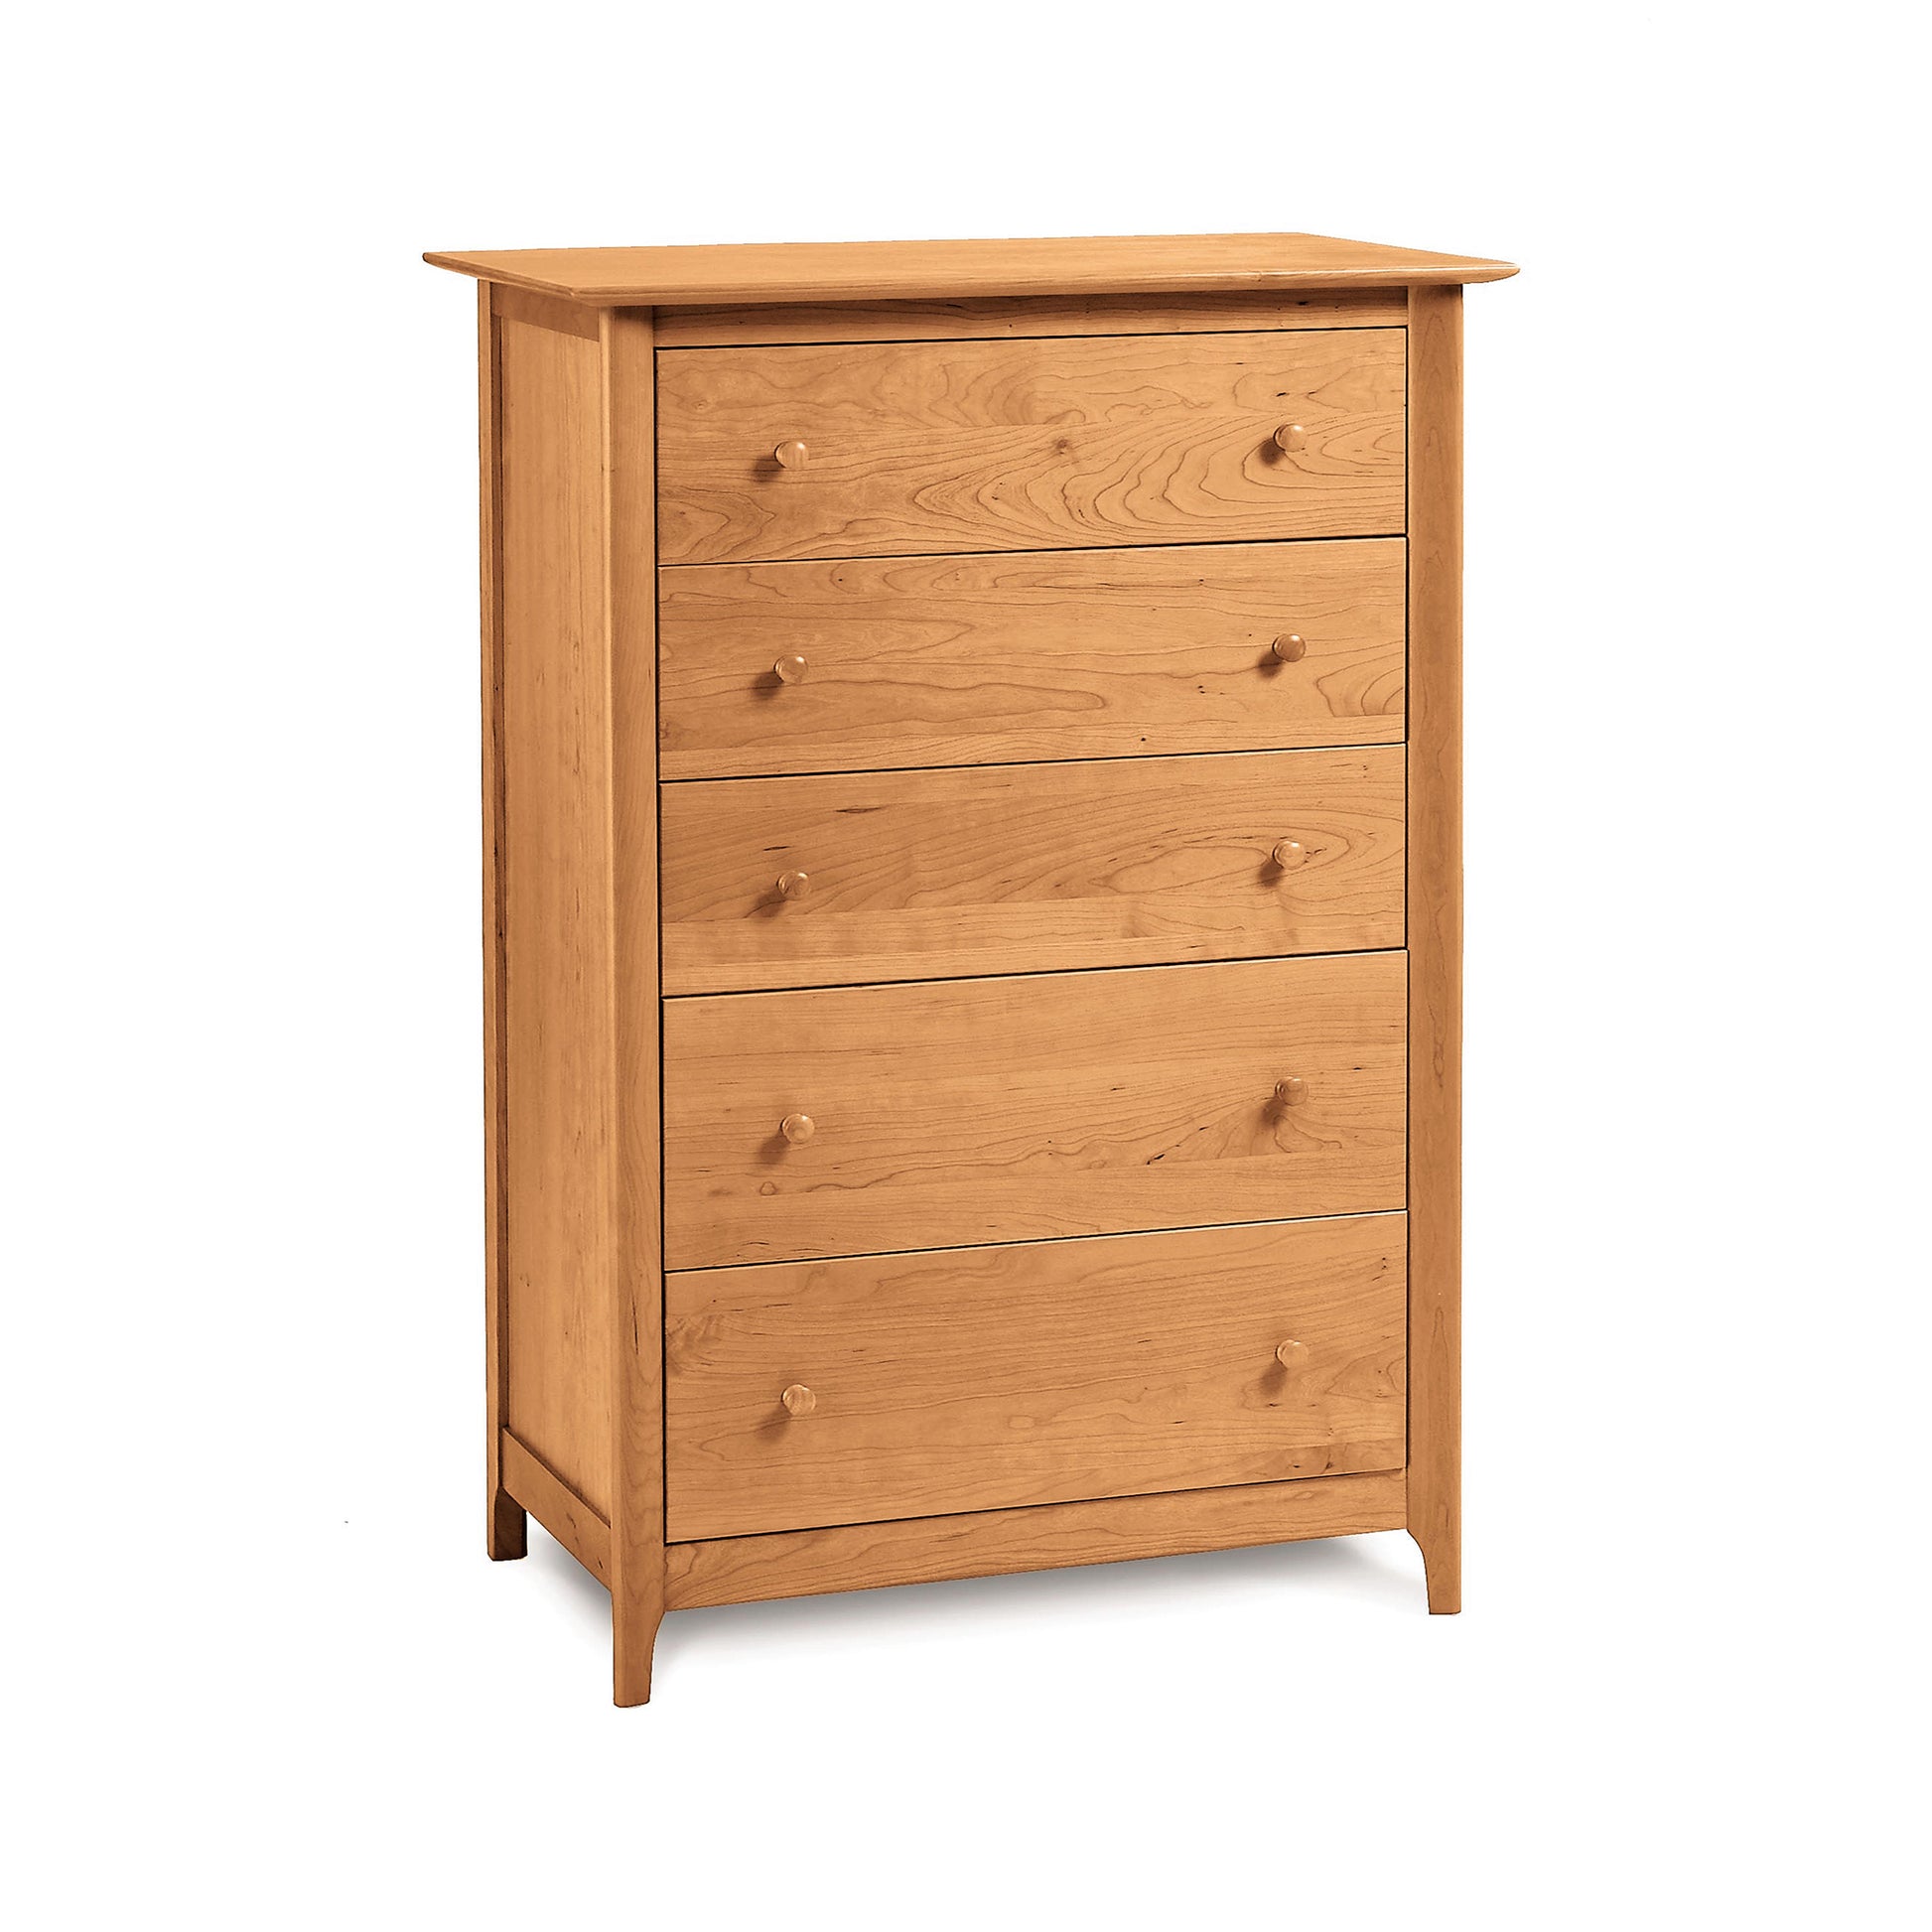 Sarah 5-Drawer Chest by Copeland Furniture, made of natural cherry wood, isolated on a white background.